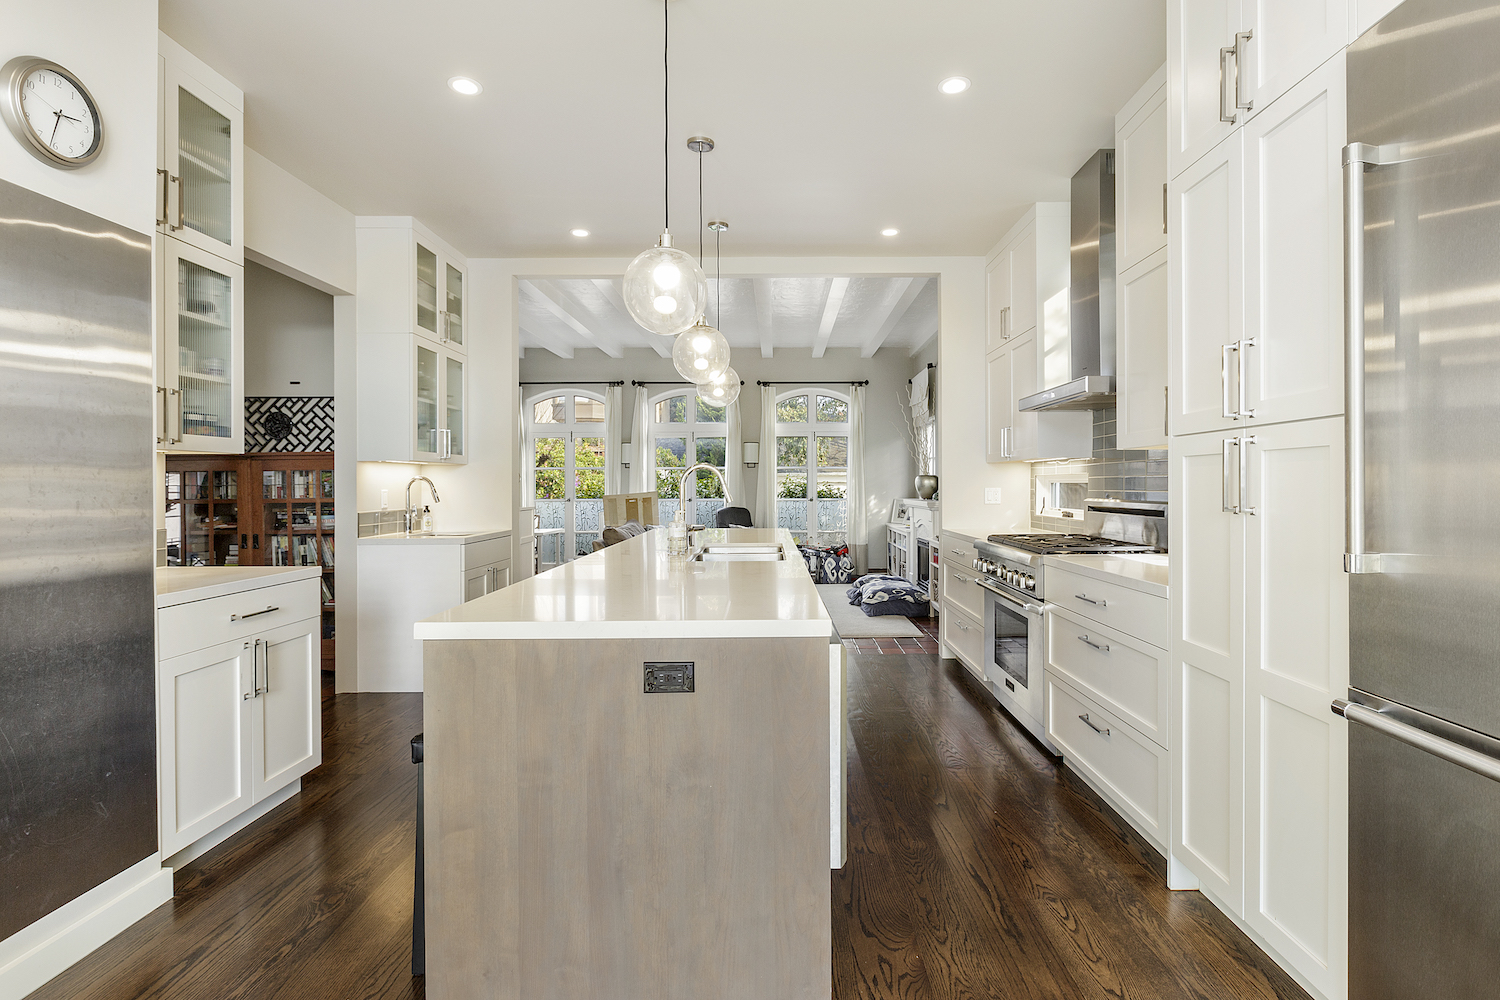 kitchen with white cabinets and stainless steel appliances and large island and wood floors.jpg